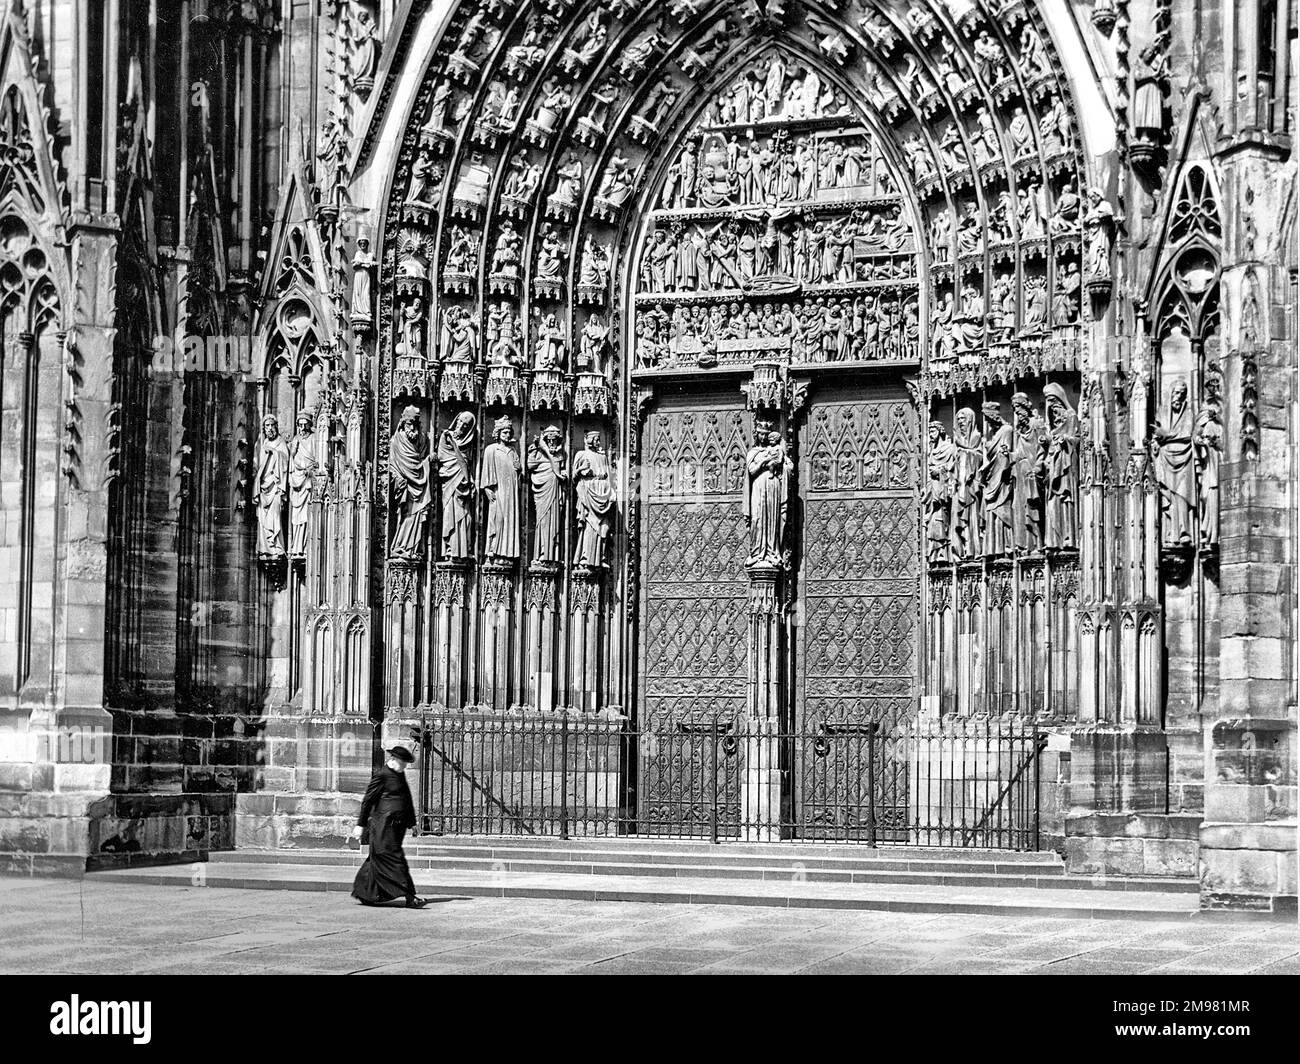 Priest walking in front of Strasbourg Cathedral, France. Stock Photo